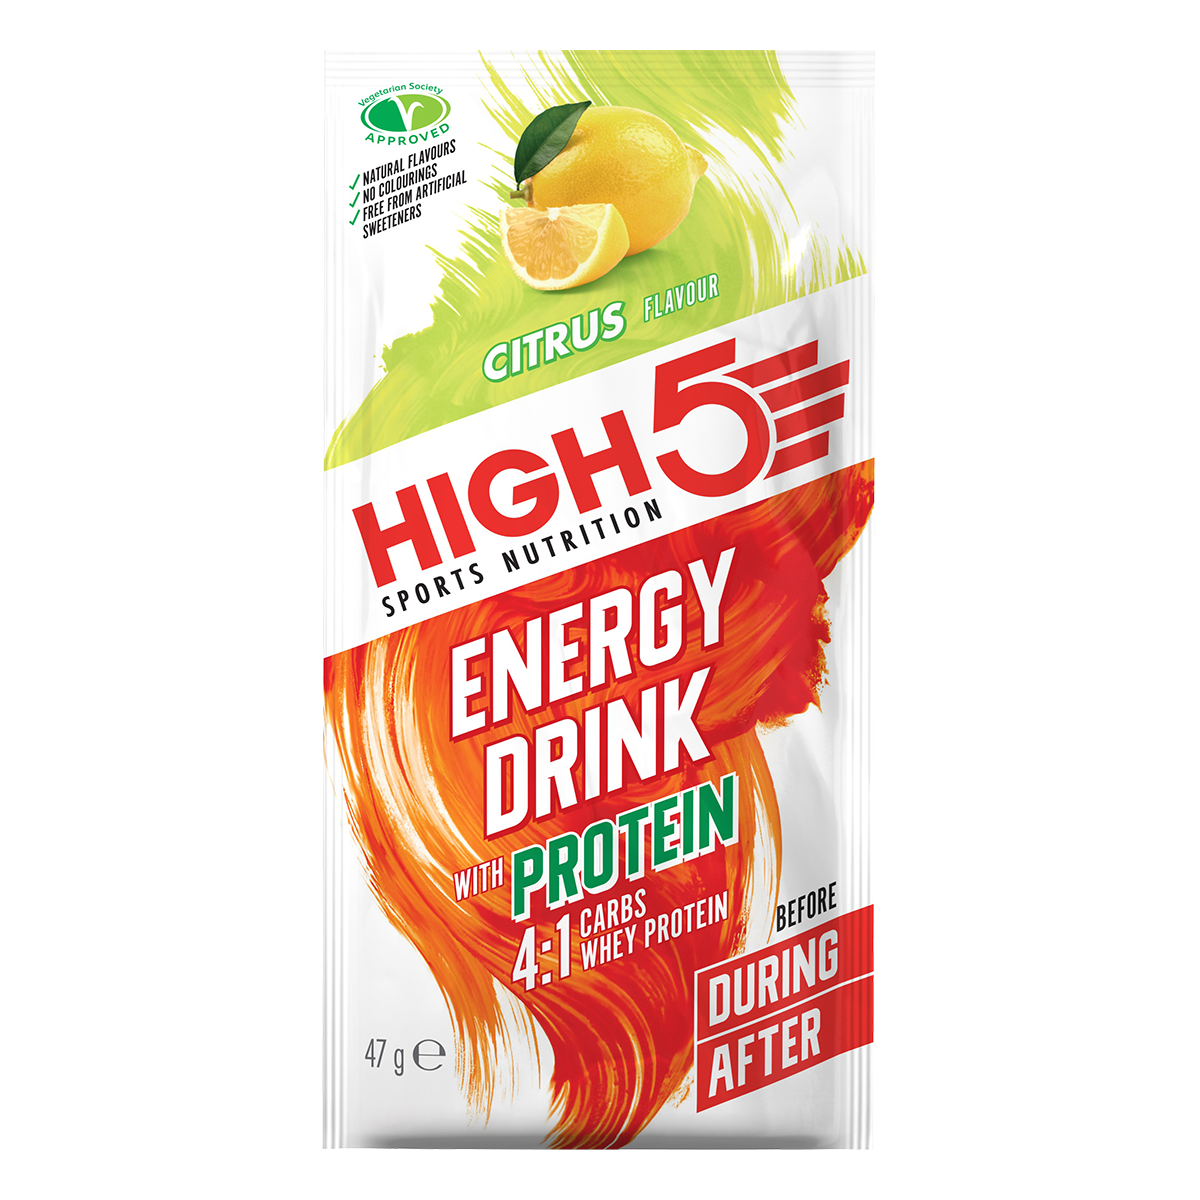 Energy-Drink-With-Protein_Citrus_47g_Front_RGB_1200x1200.png